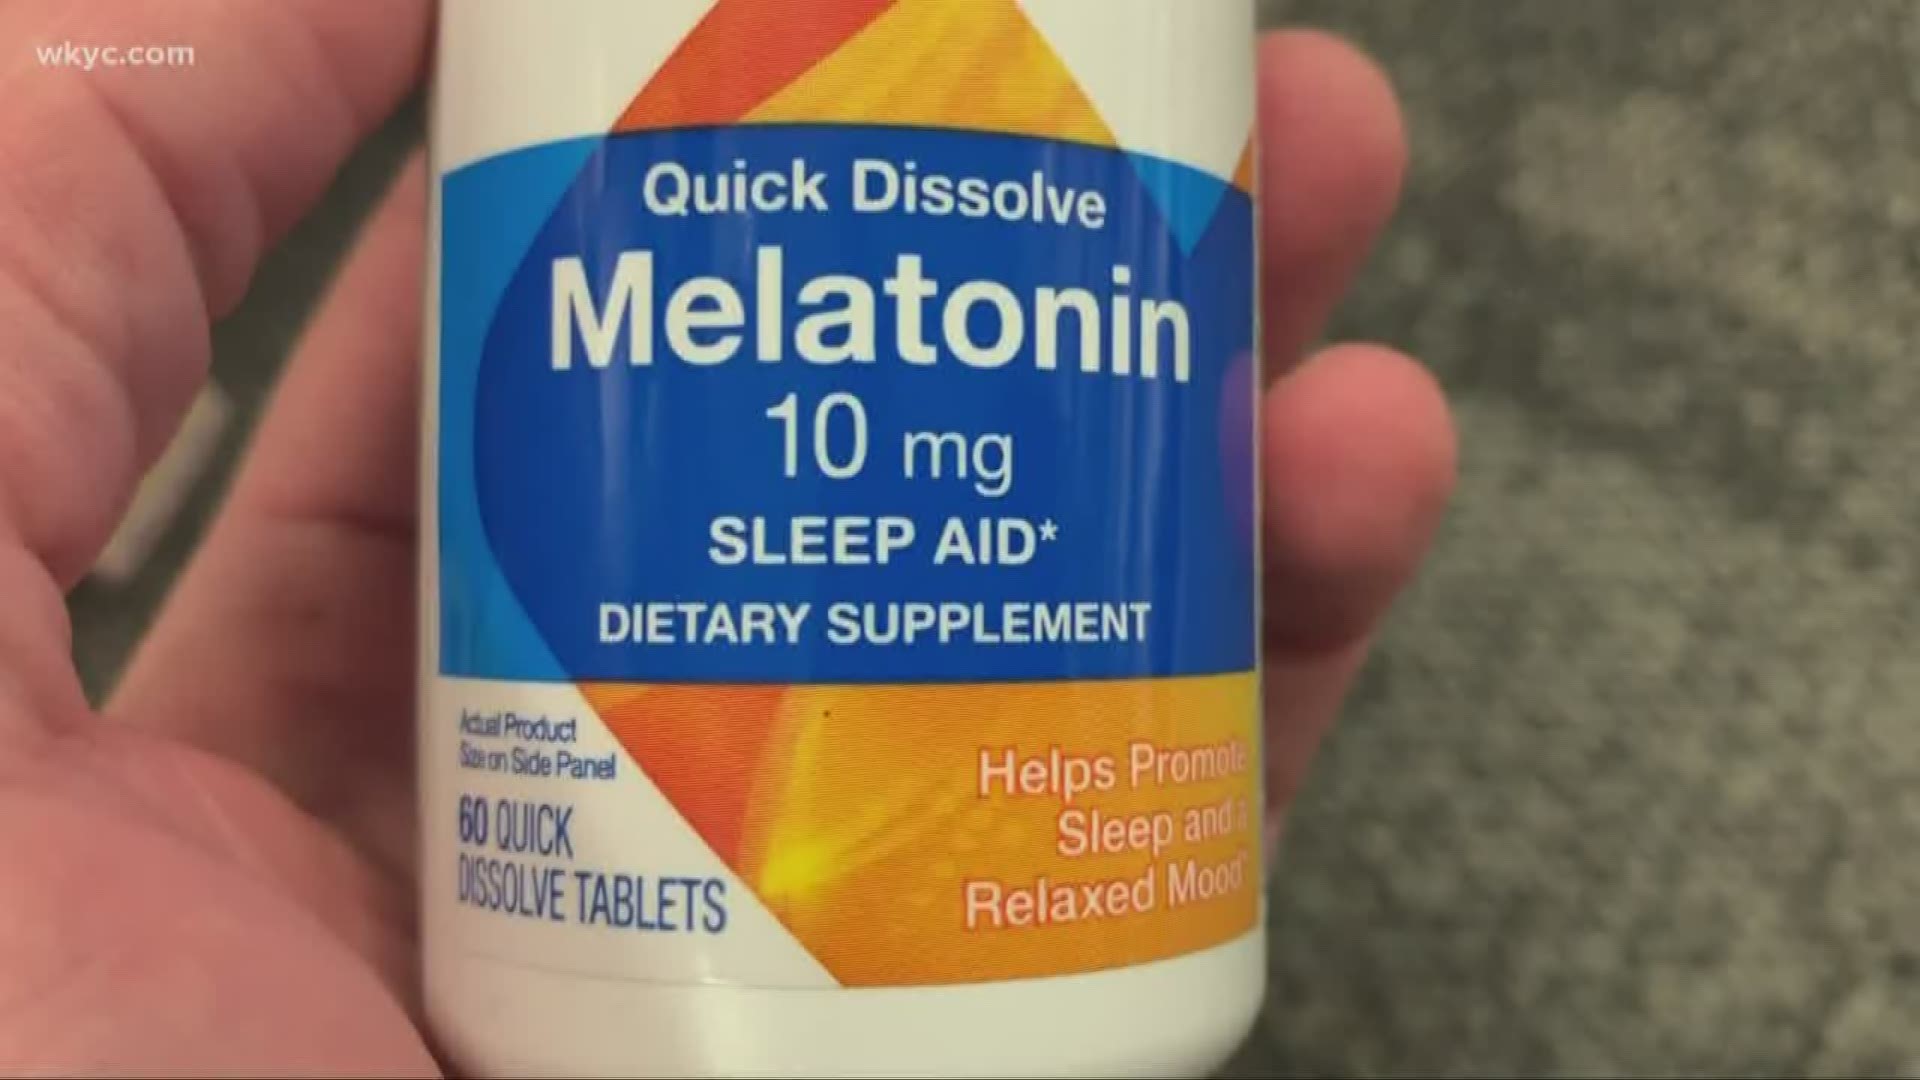 Does melatonin actually work? How much should you take? We went to a sleep expert at the Cleveland Clinic to learn the truth about melatonin.